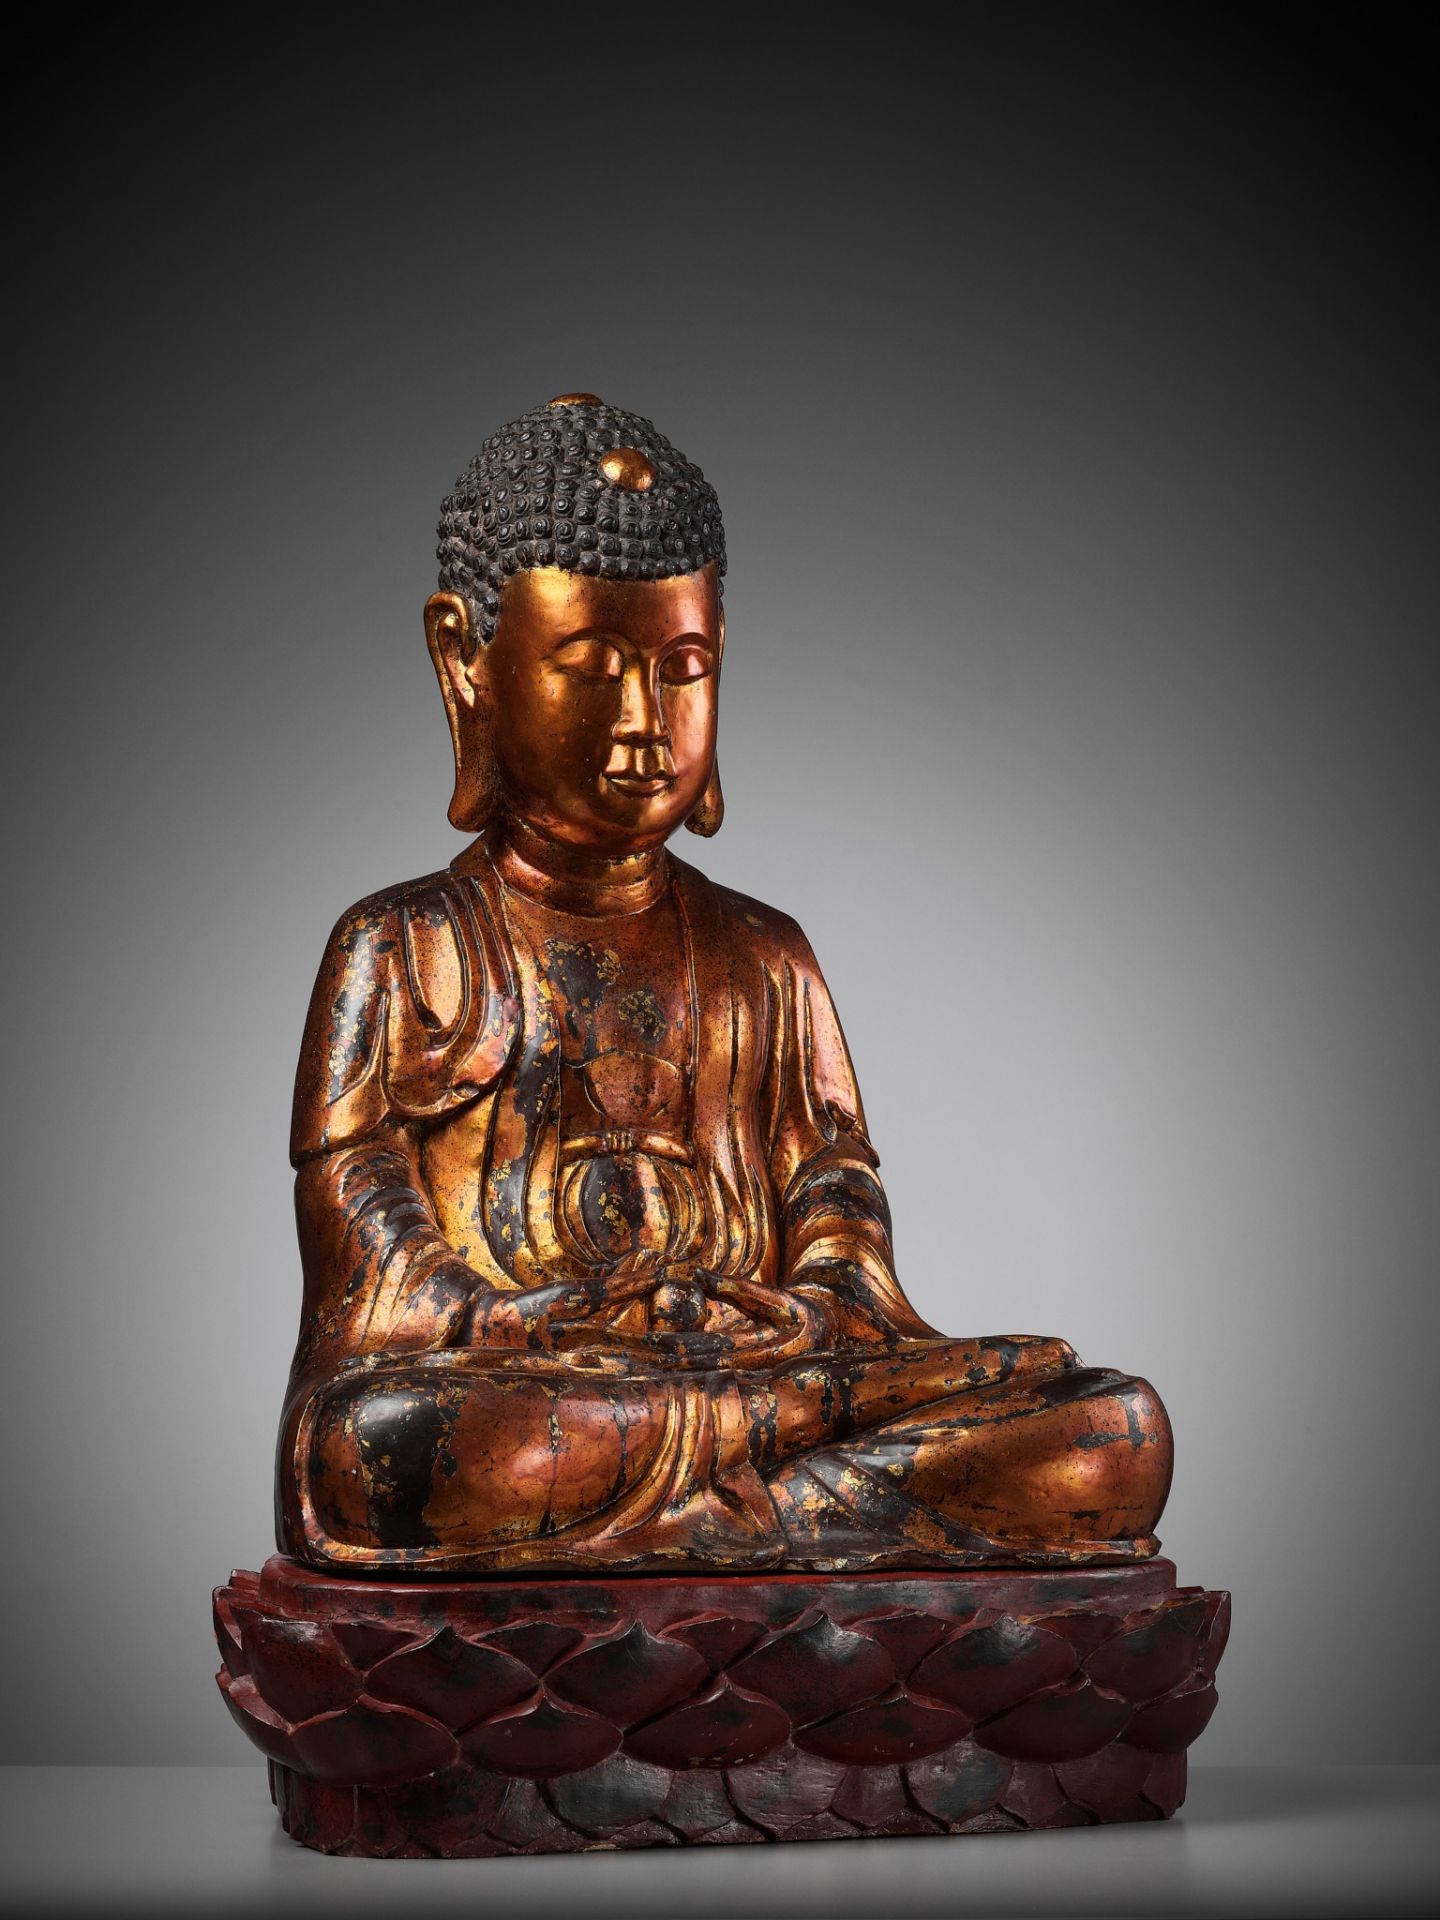 AN EXTRAORDINARY LARGE GILT-LACQUER WOOD STATUE OF BUDDHA, VIETNAM, 17TH-18TH CENTURY - Image 8 of 11